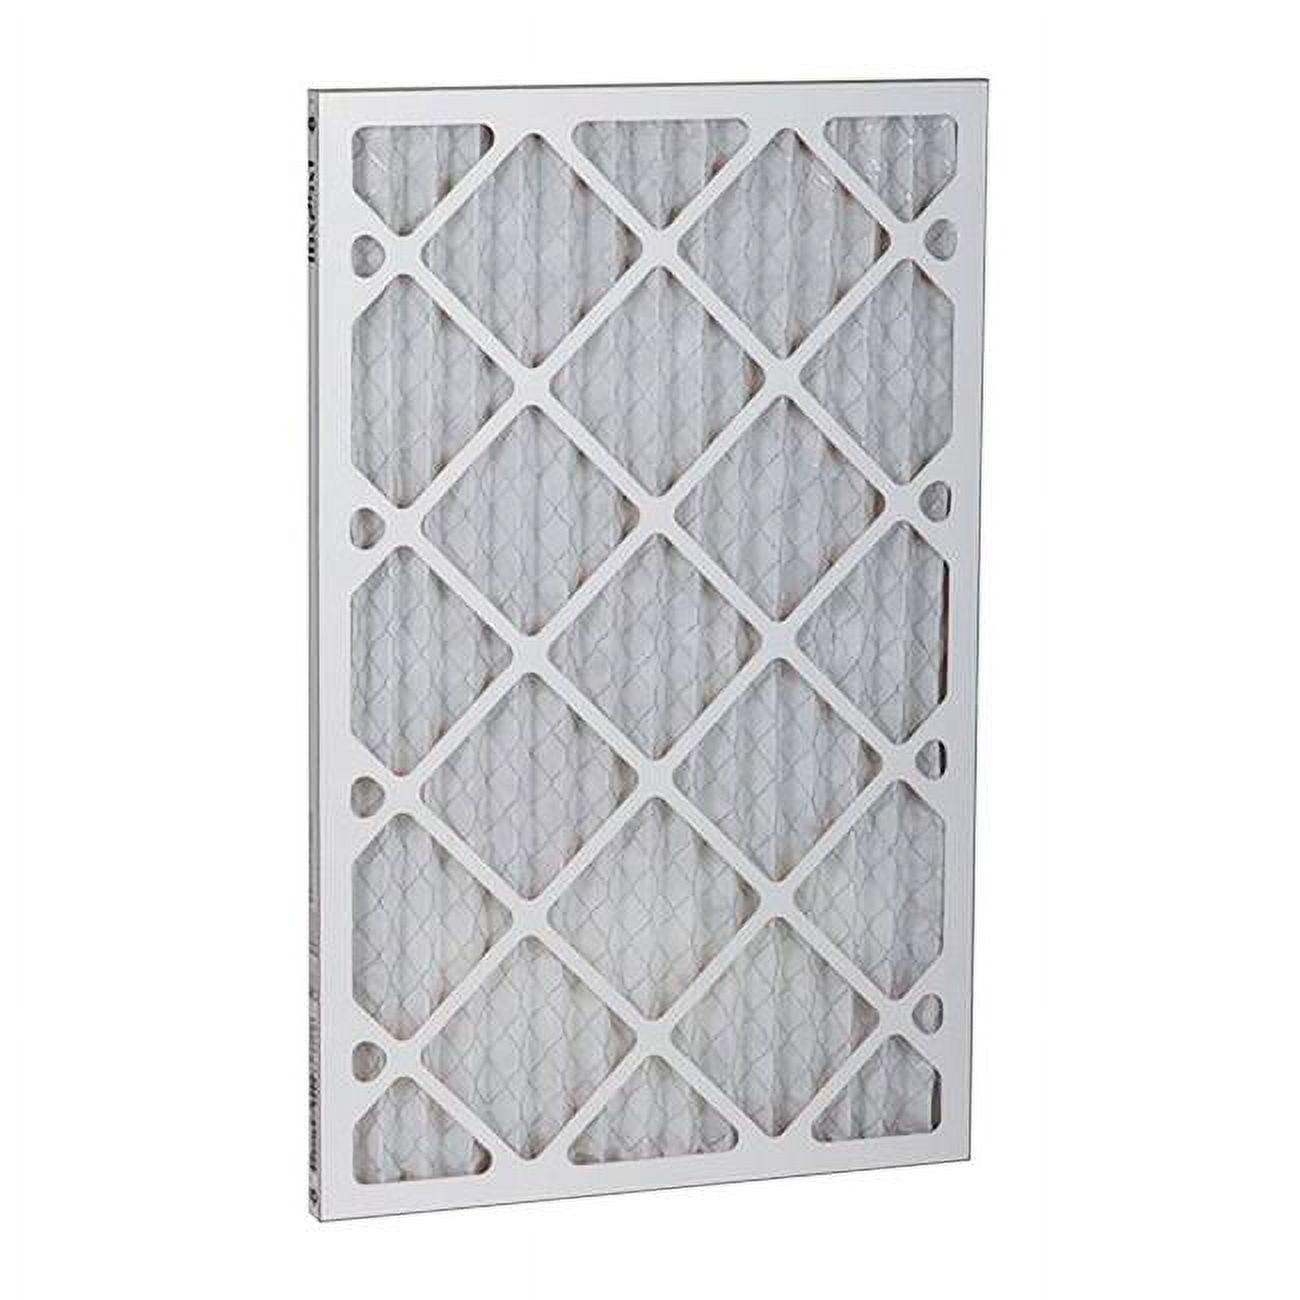 Picture of Bestair 4823357 24 x 20 x 1 in. 8 MERV Pleated Air Filter - Case of 12